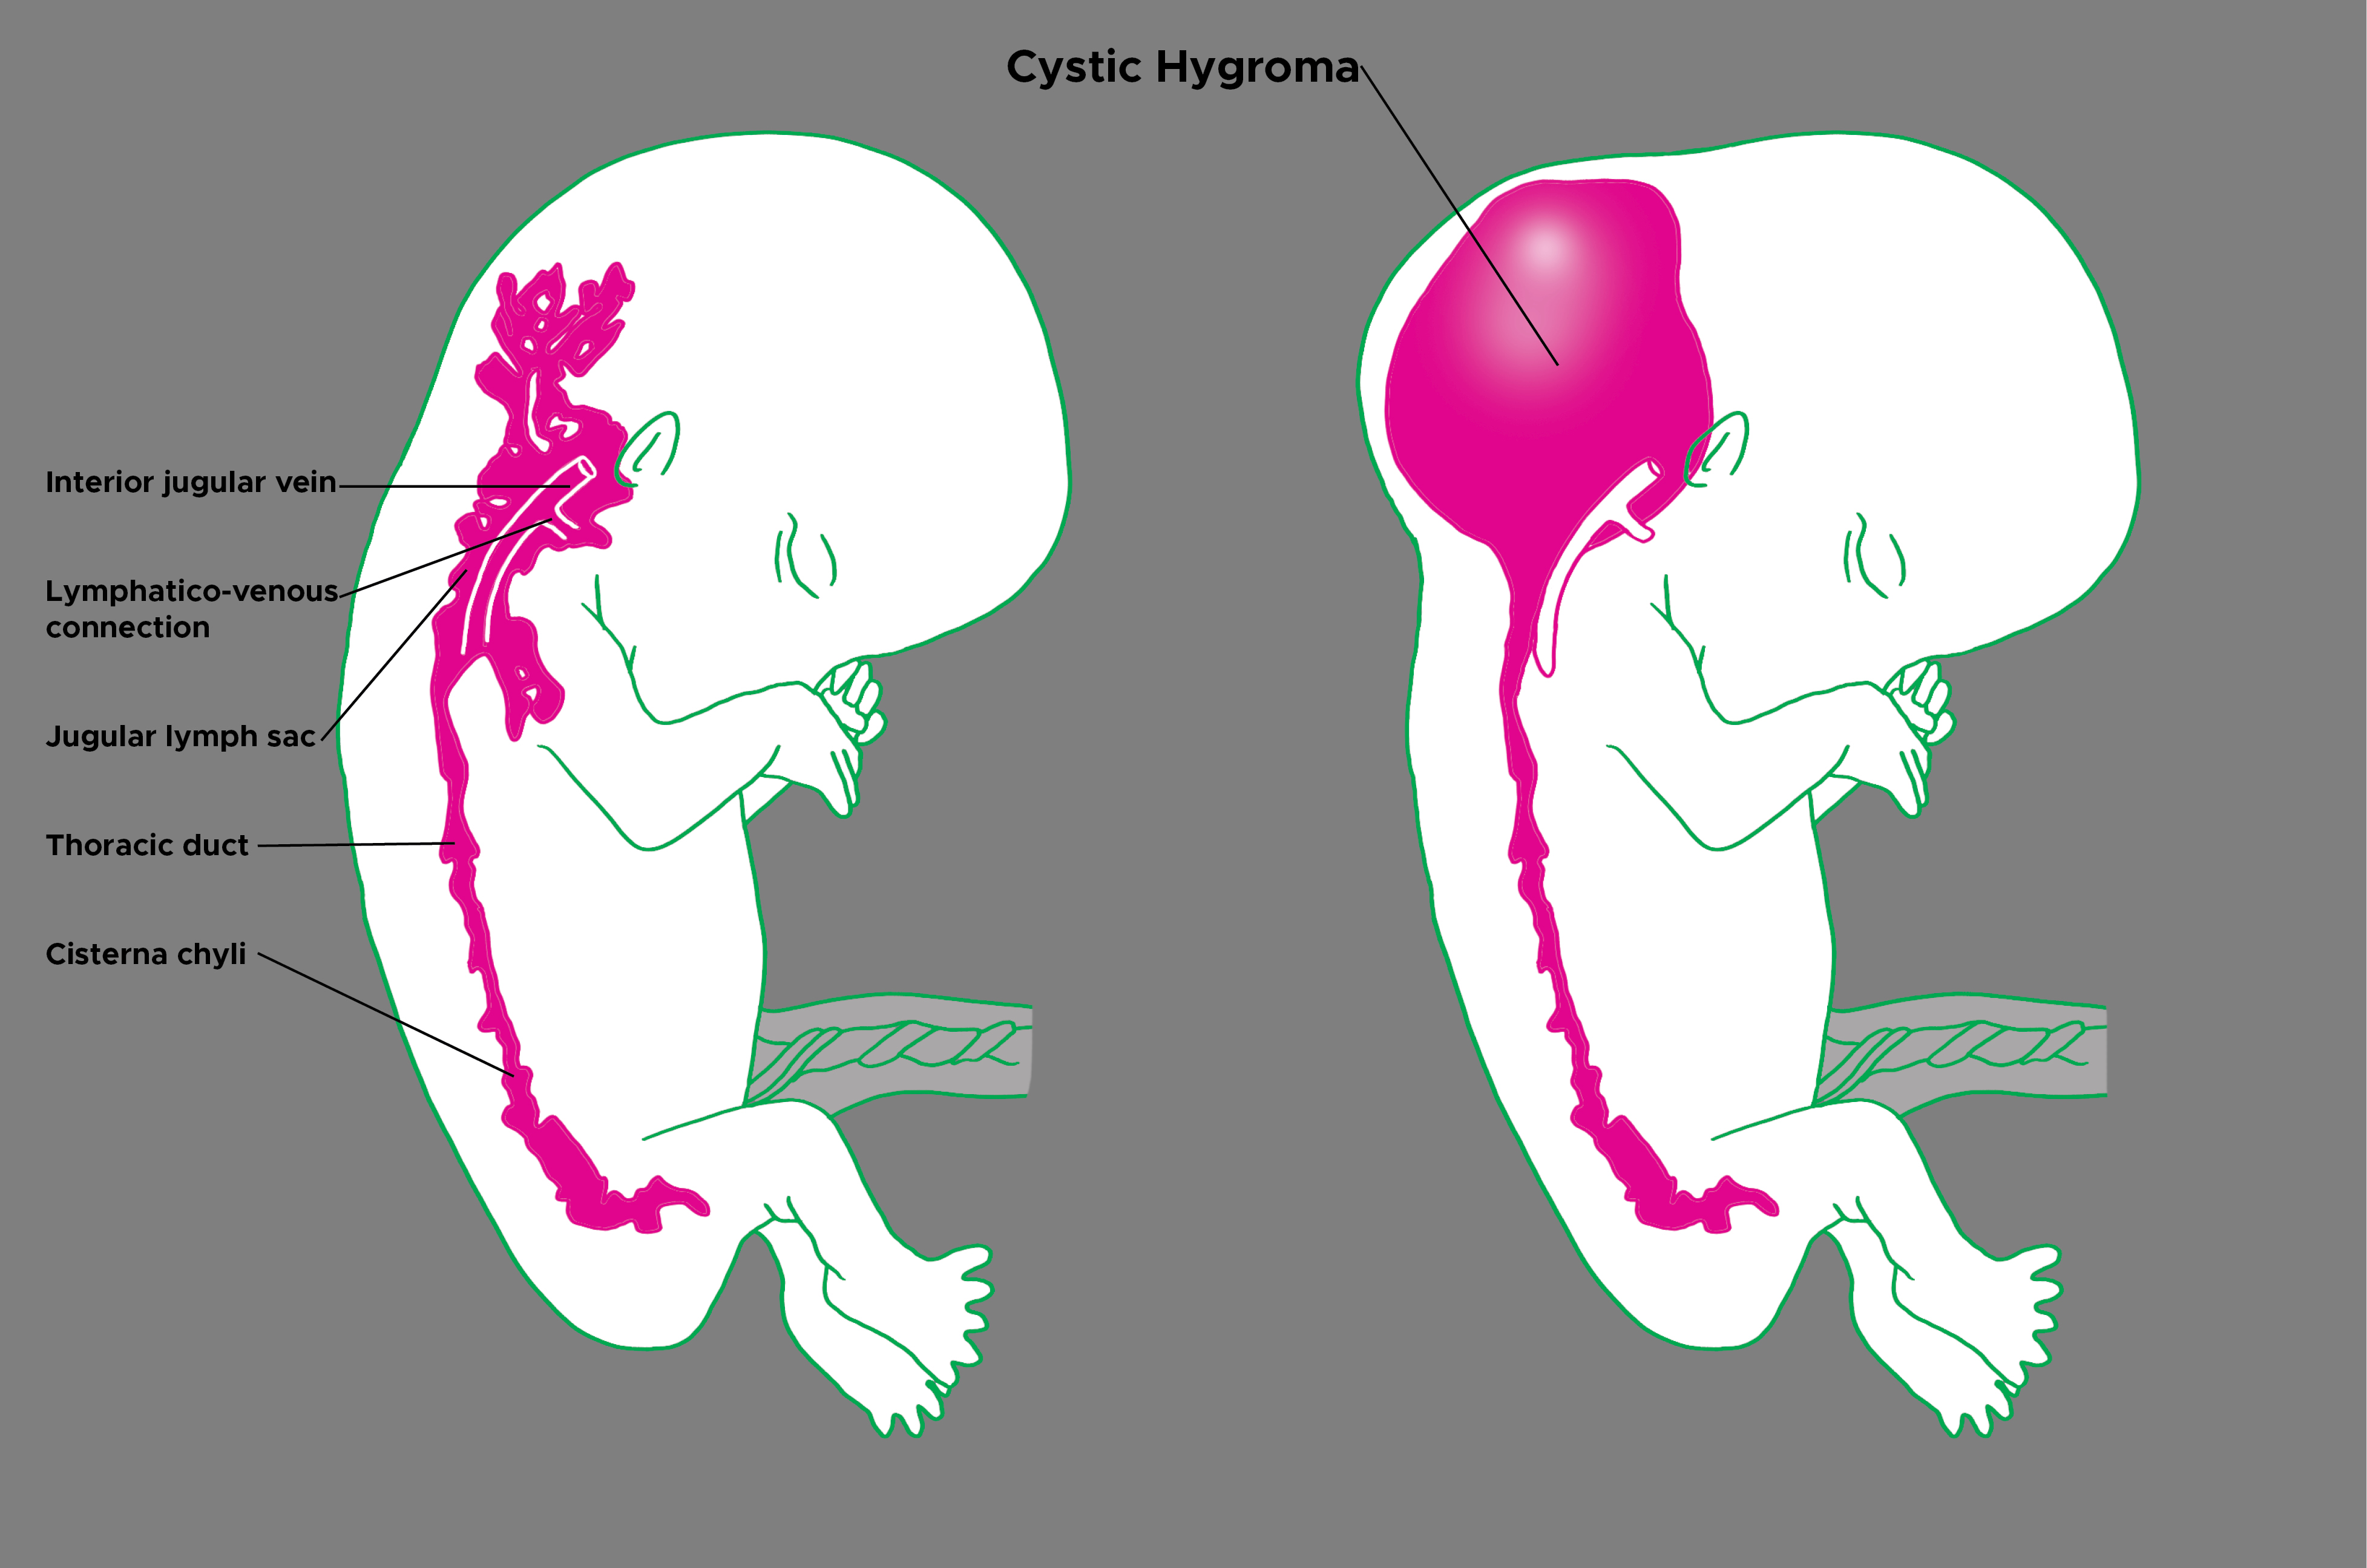 Illustration of normal fetus and fetus with cystic hygroma.